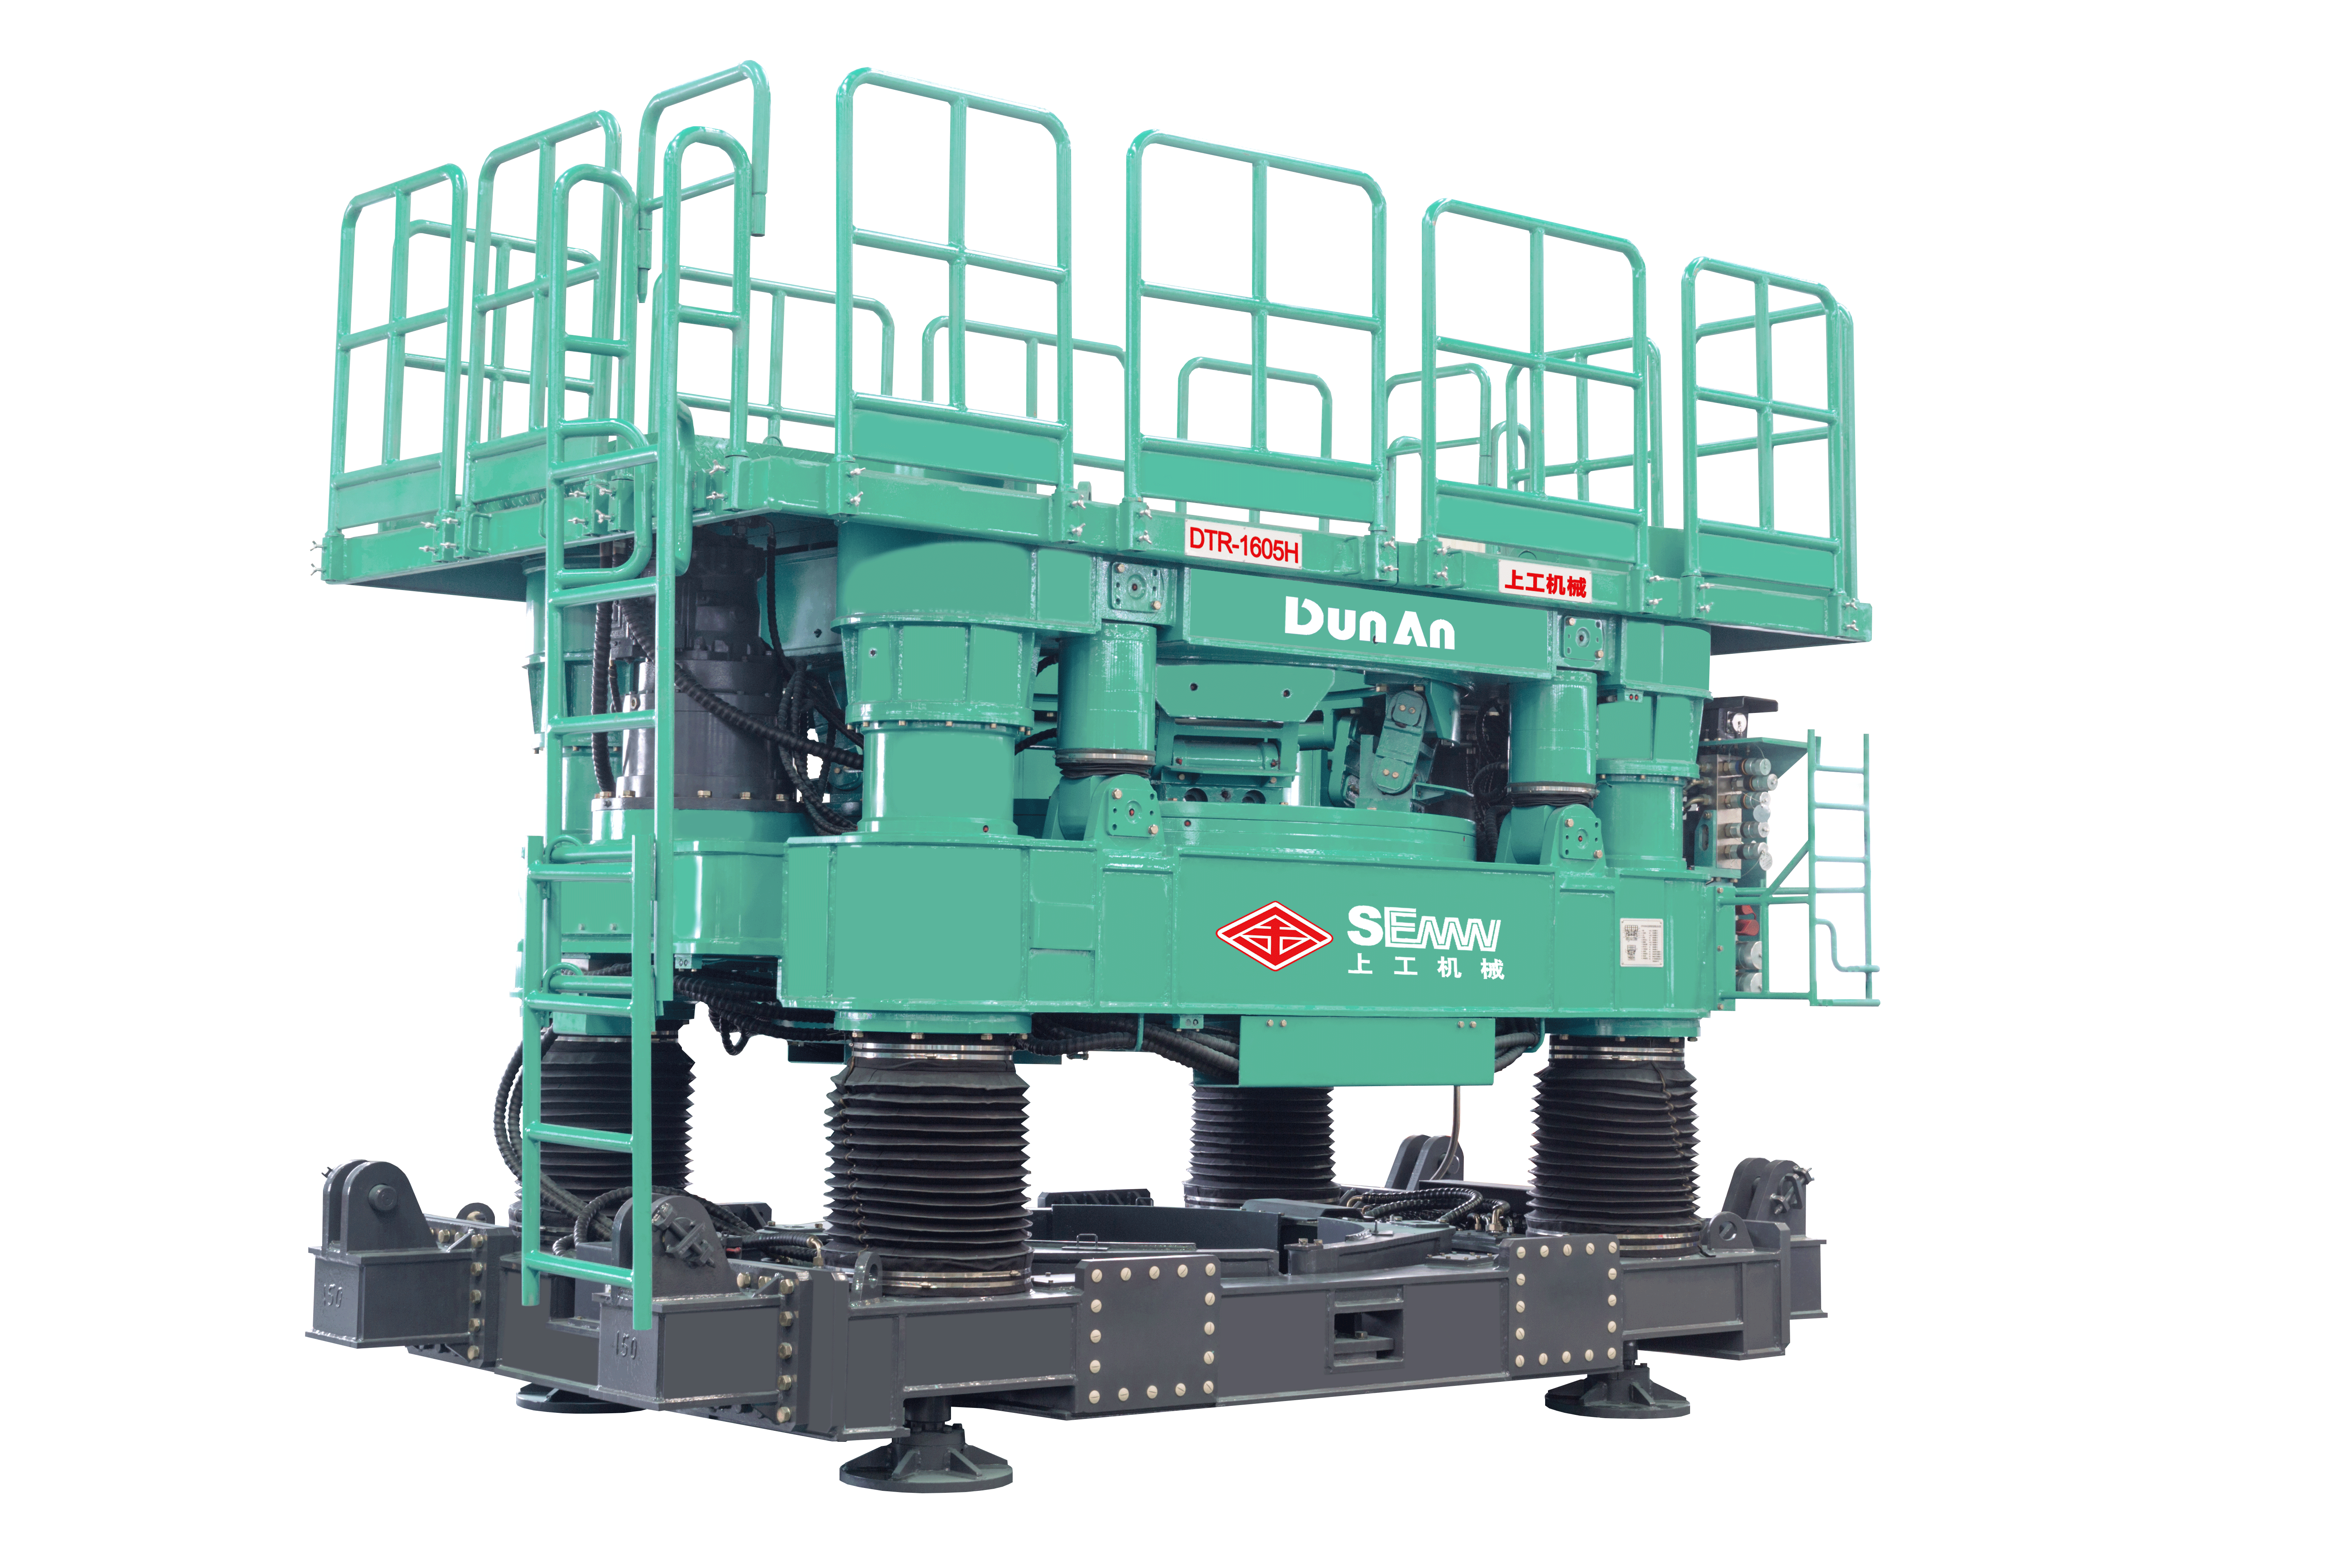 2019 Good Quality Semw Piling Rigs -
 DTR 1605H Casing Rotator Device – Engineering Machinery